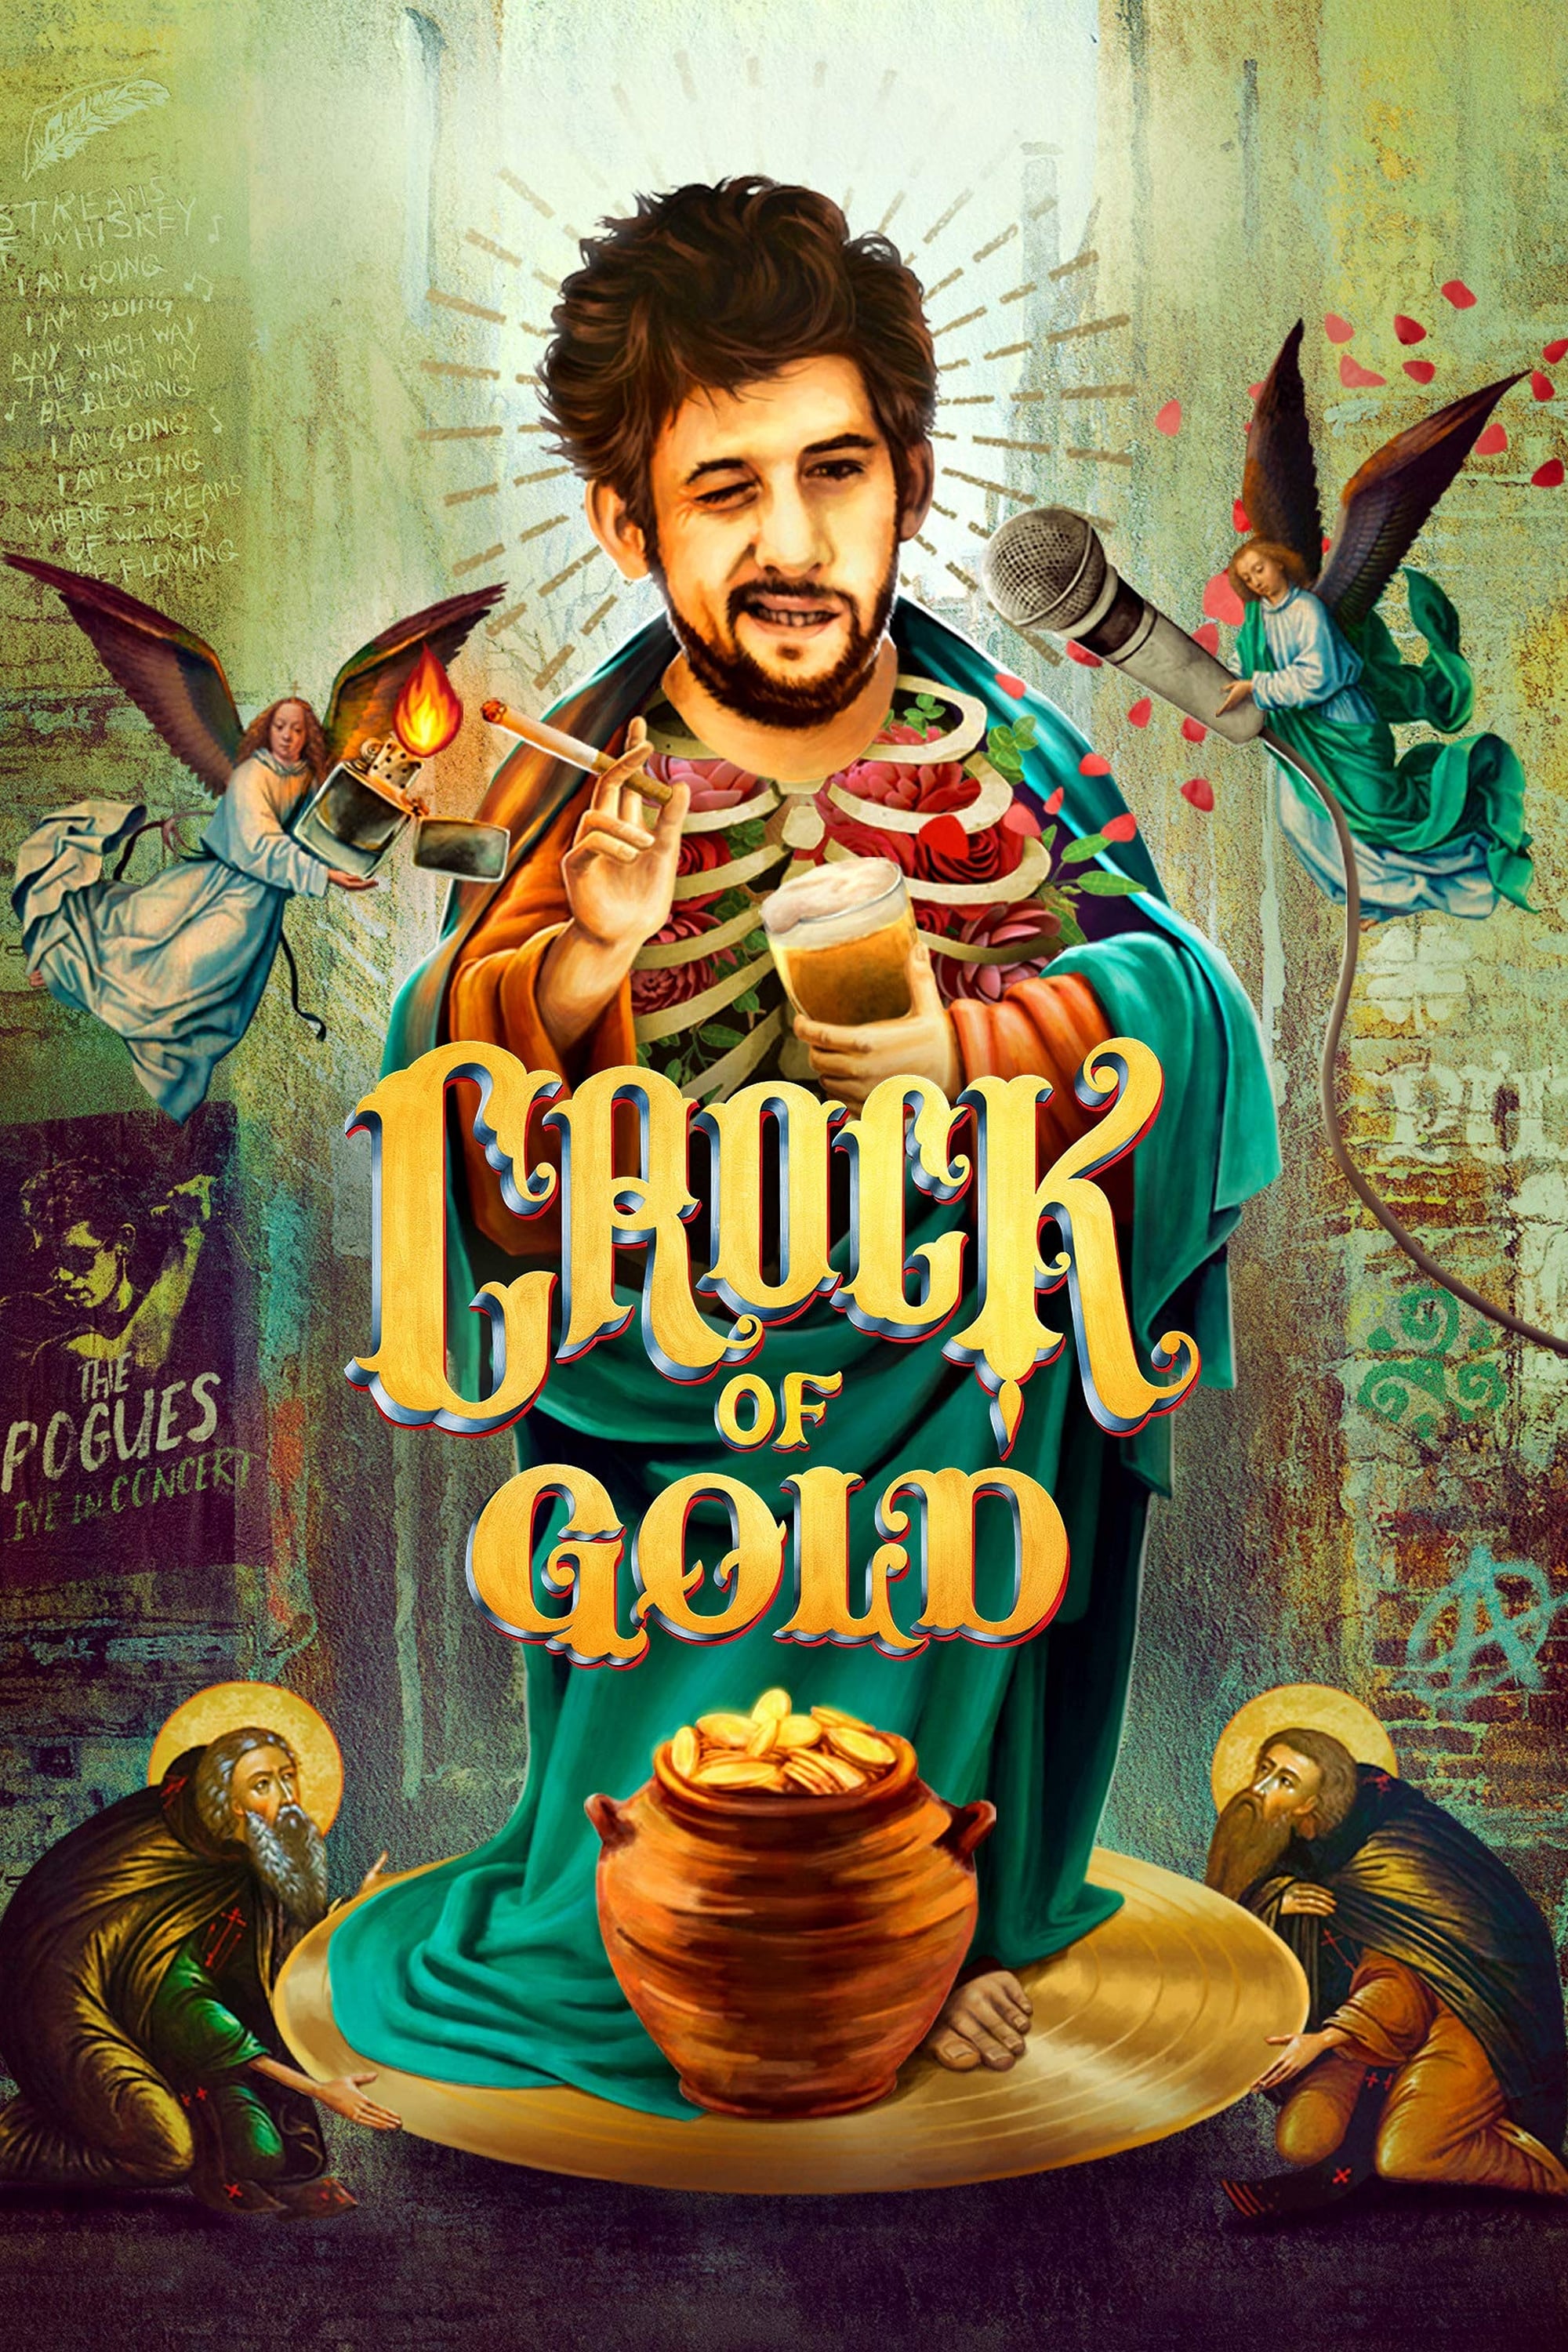 Crock of Gold: A Few Rounds With Shane MacGowan (2020)